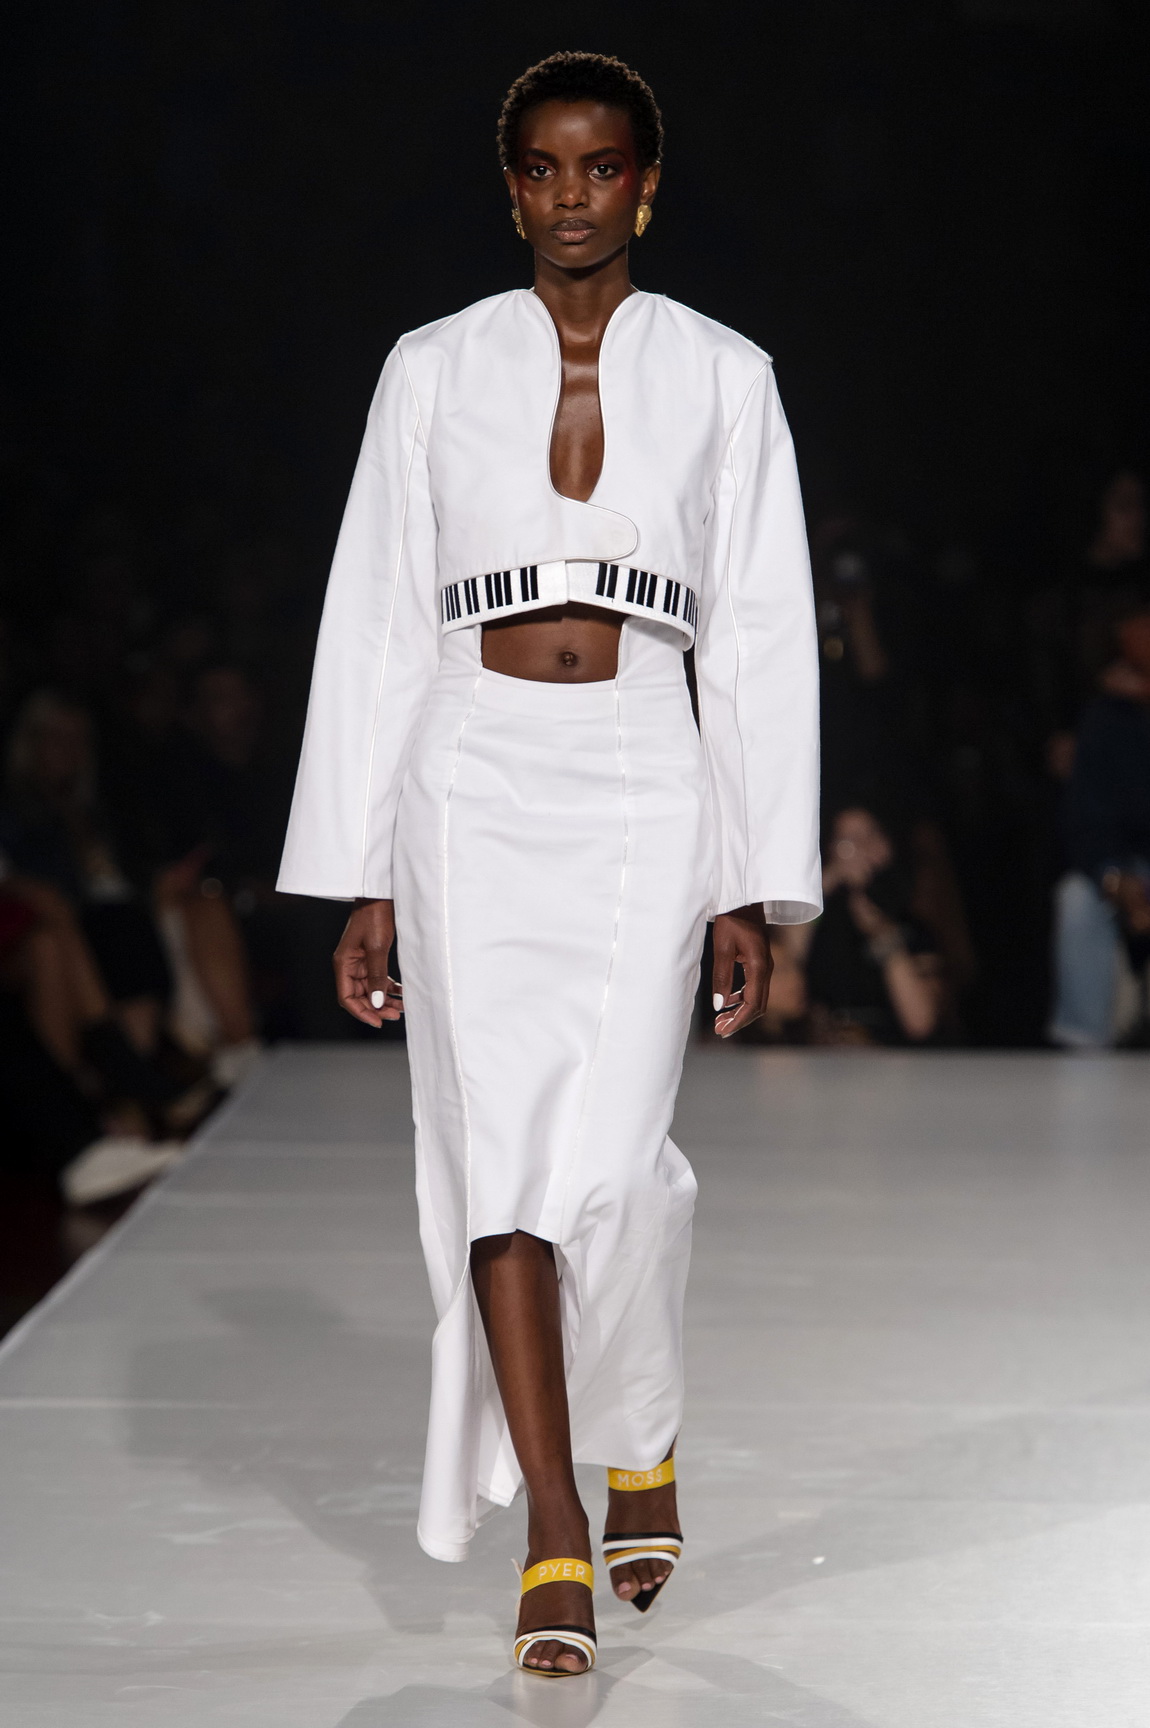 Show Review: Pyer Moss SS20 'Sister' Show Focused on Black